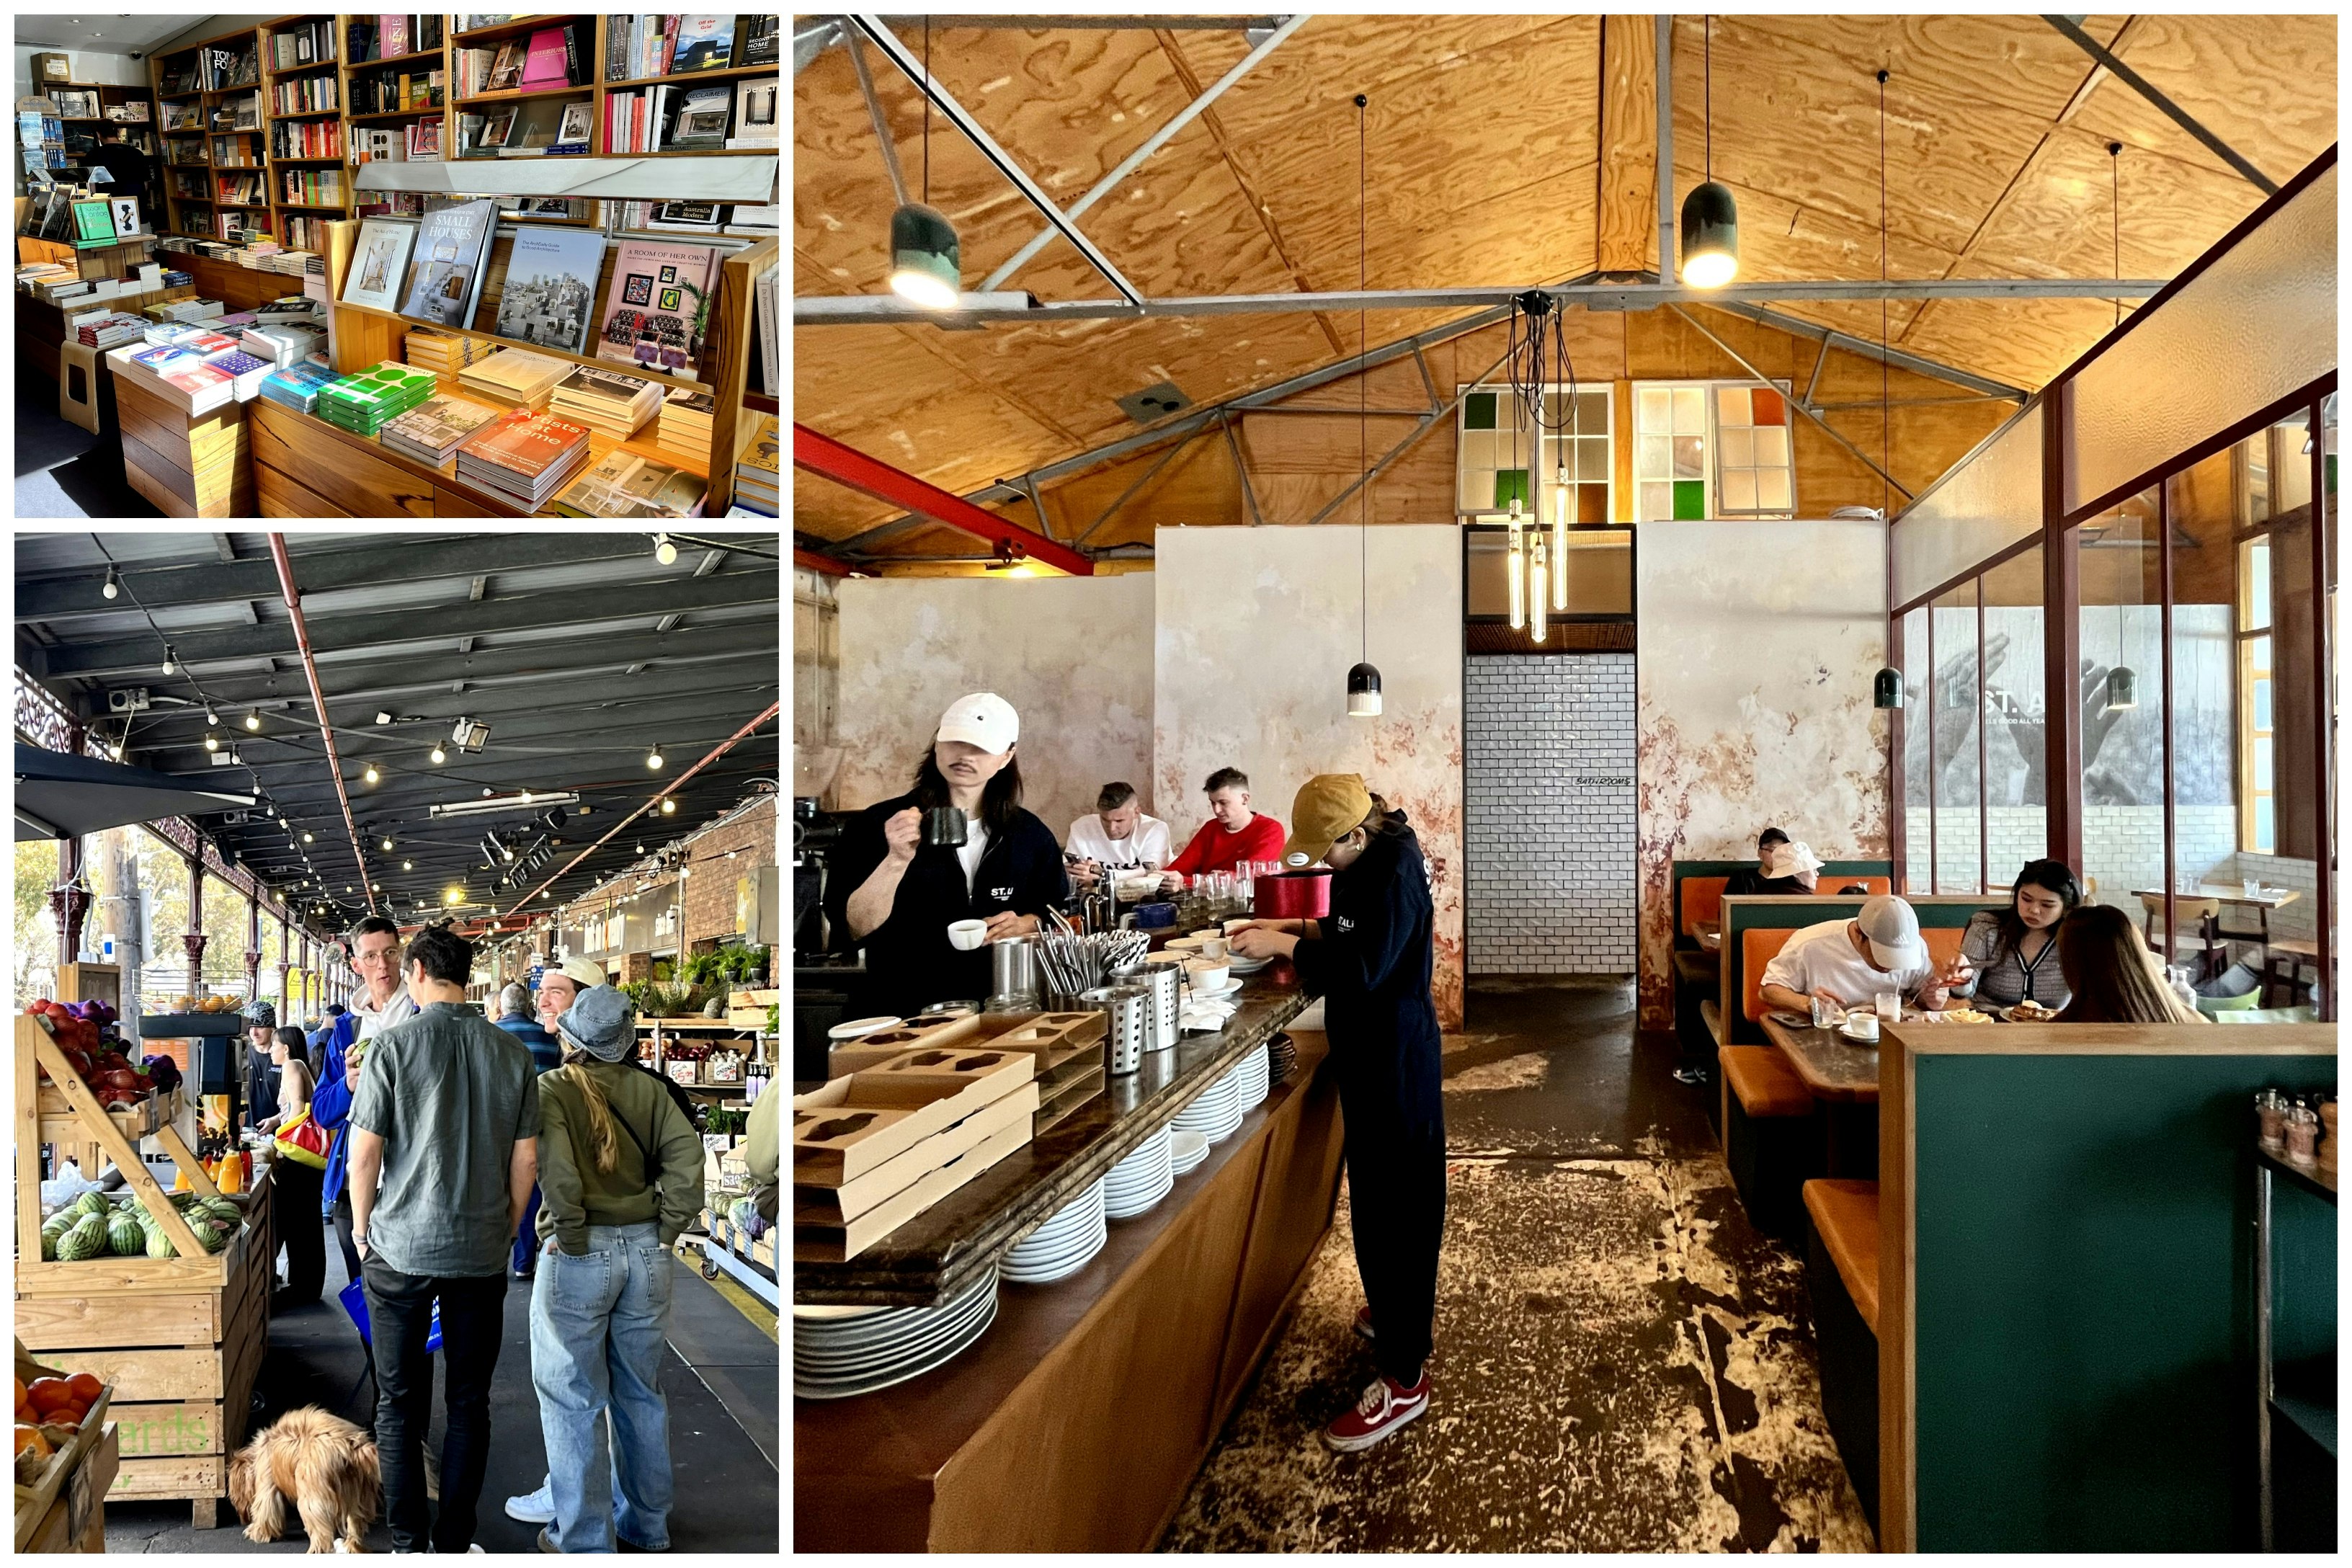 Daily snapshot of Melbourne life including an interior shot of a trendy cafe, a street market and a bookstore